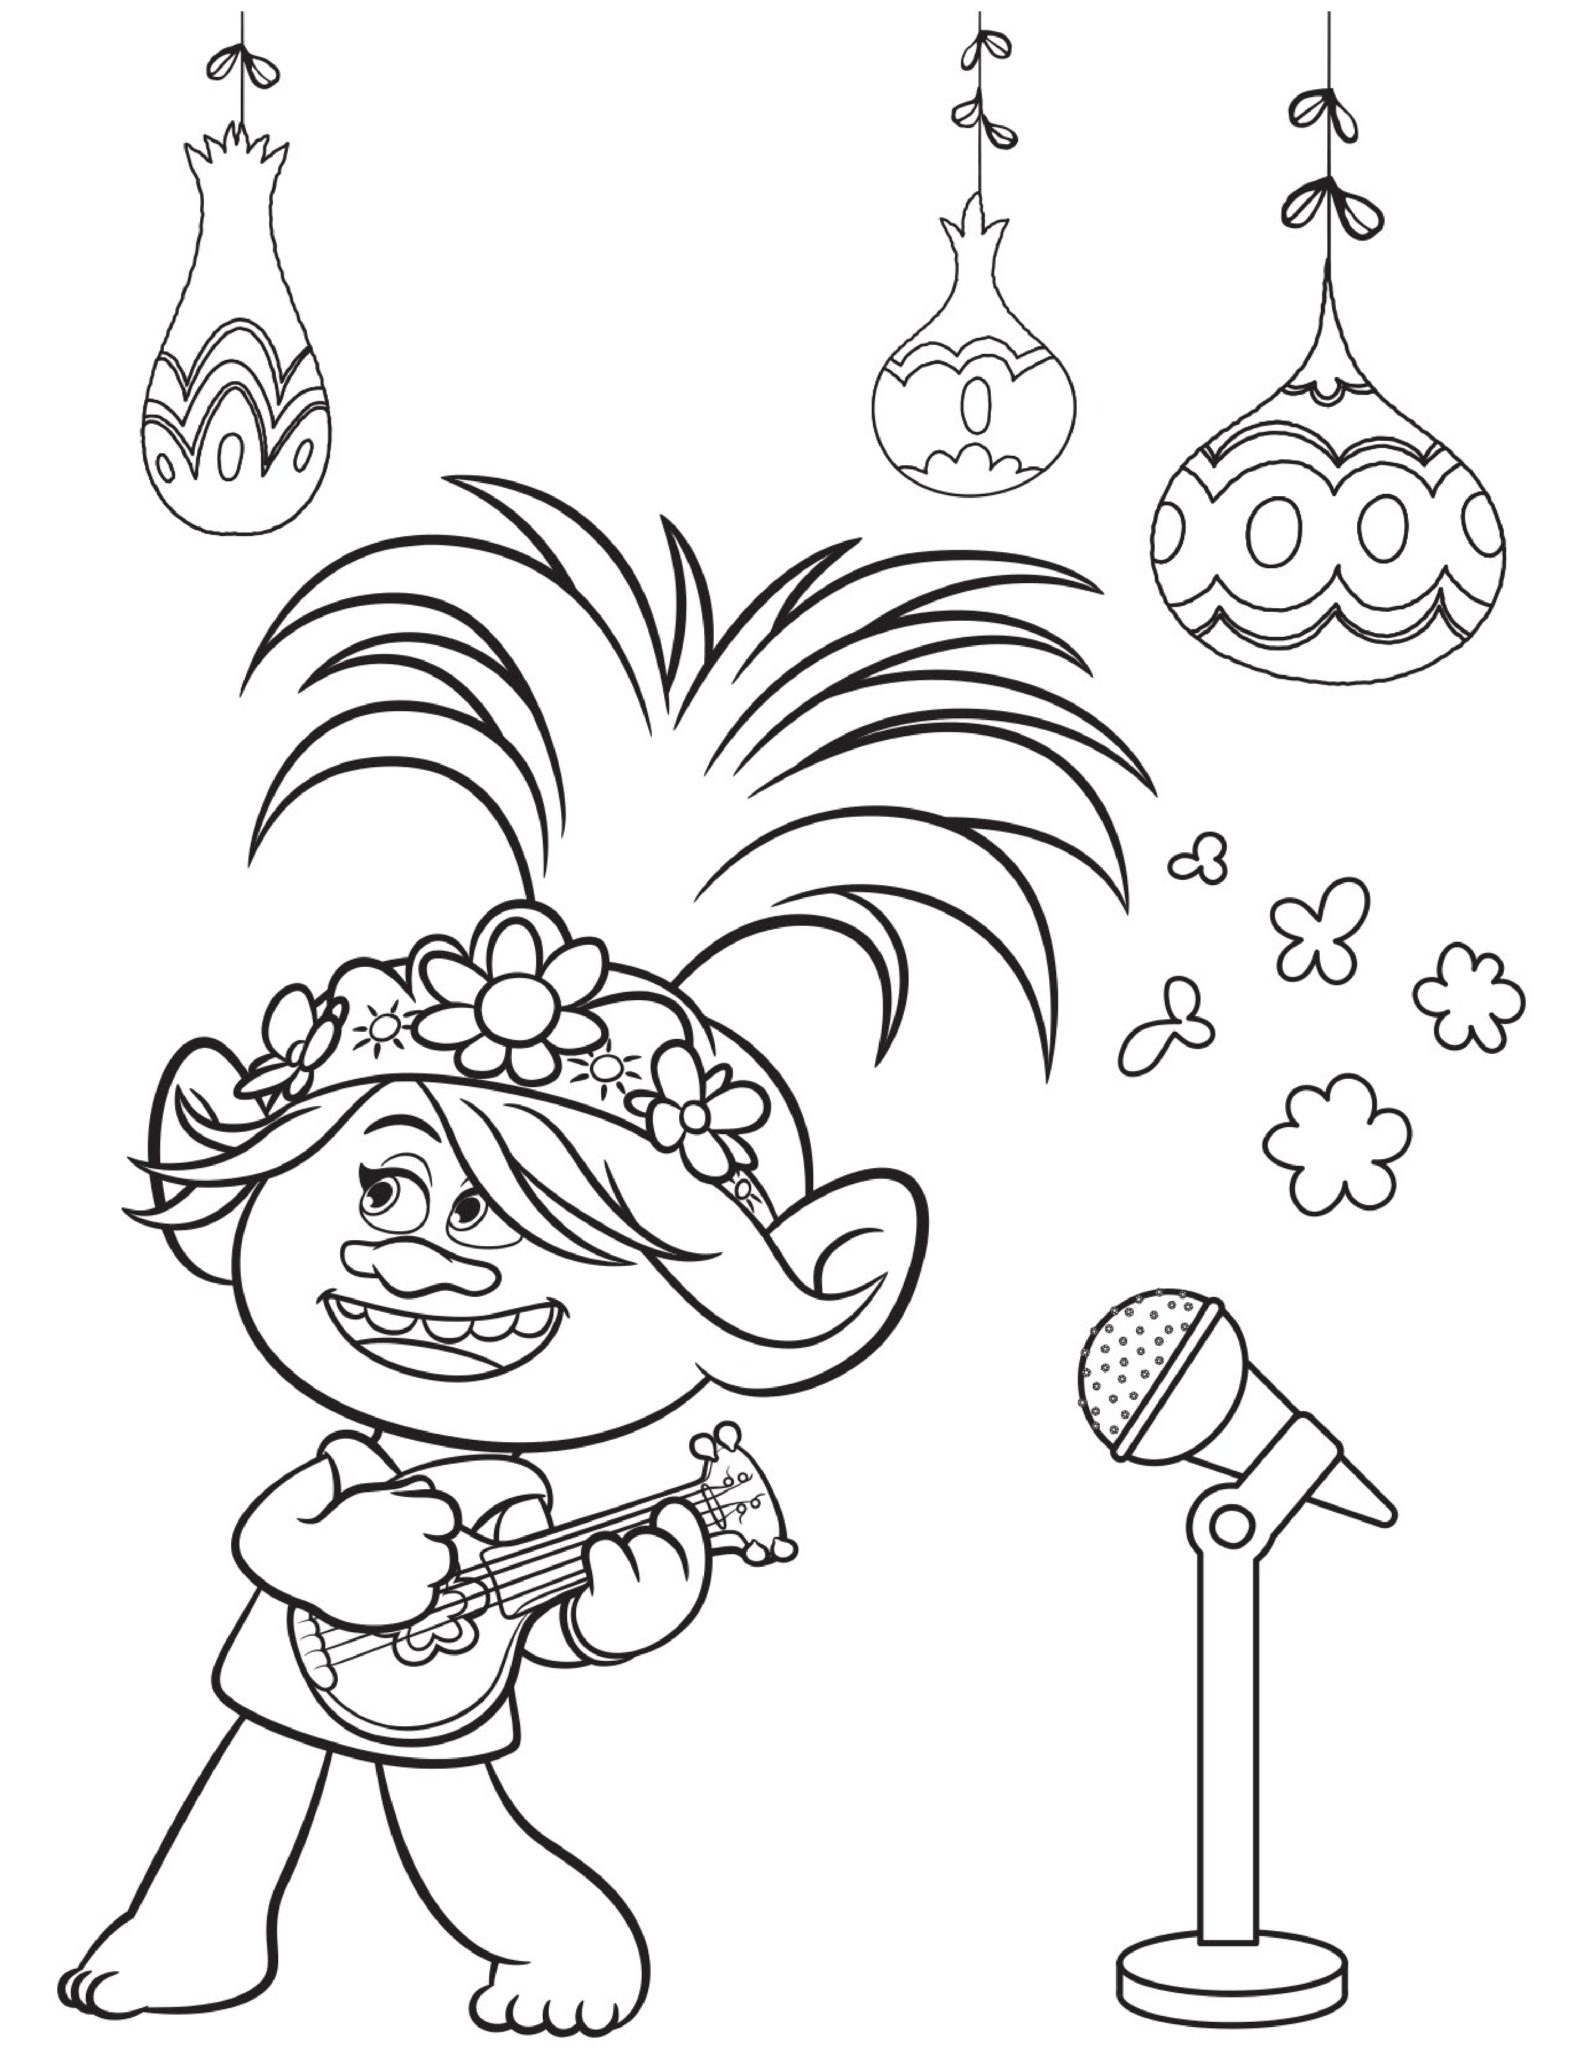 Free Printable TROLLS Coloring Pages, Activity Sheets, Zoom Backgrounds